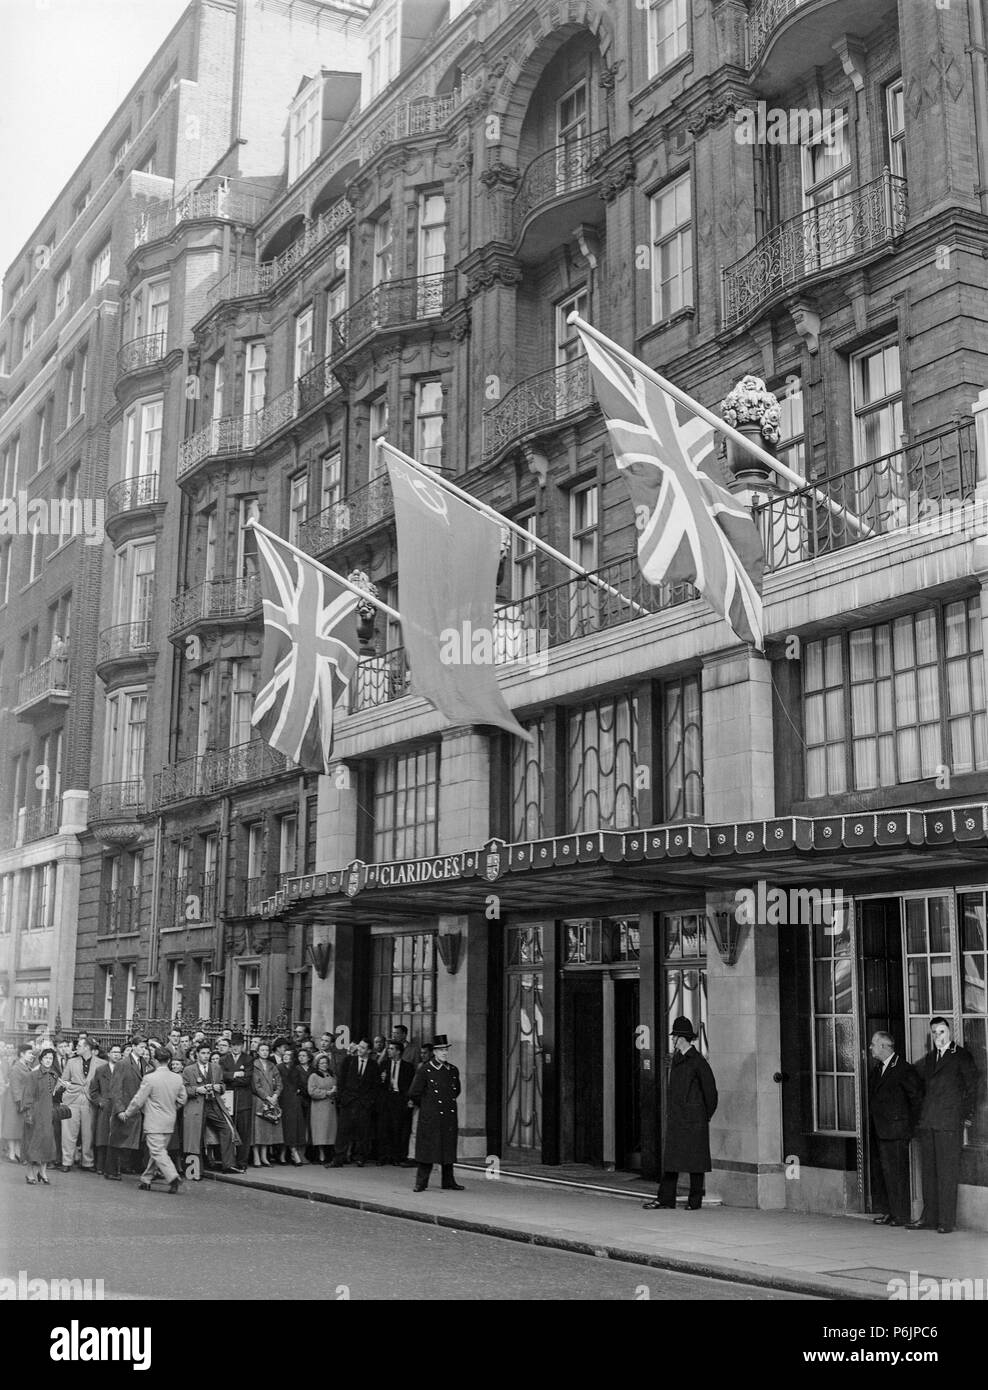 The front of Claridges Hotel in London during the 1950s. Members of the public and cameramen awaiting the arrival of a famous person. Stock Photo